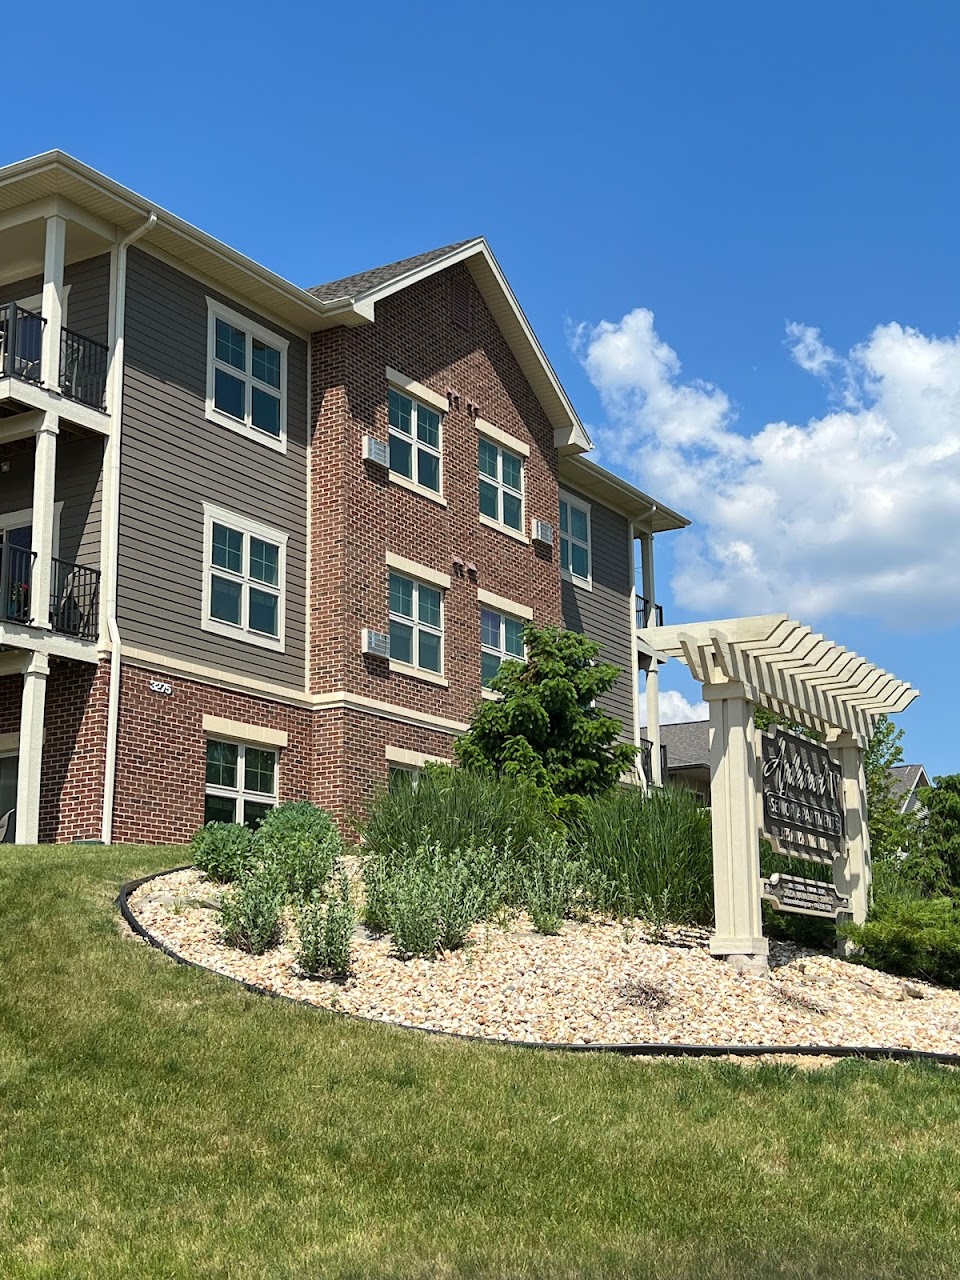 Photo of APPLEWOOD IV. Affordable housing located at 3275 PENNSYLVANIA AVE DUBUQUE, IA 52001